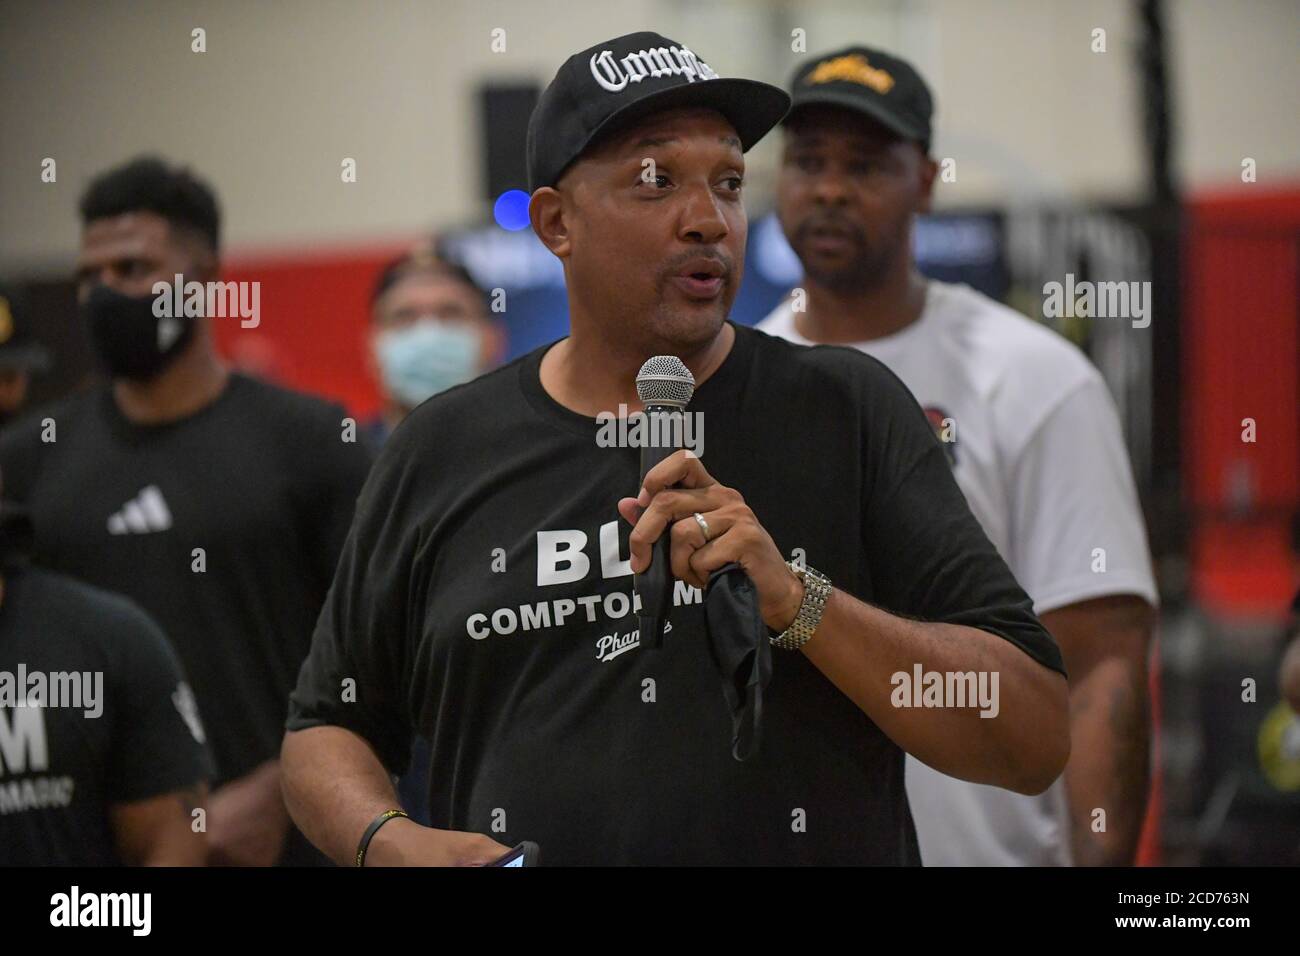 Compton Magic founder and director Etop Udo-Ema speaks during a Compton  Magic tournament at The Draft Sports Complex, Saturday, Aug. 22, 2020, in  Corona, Calif. (Dylan Stewart/Image of Sport) Photo via Newscom